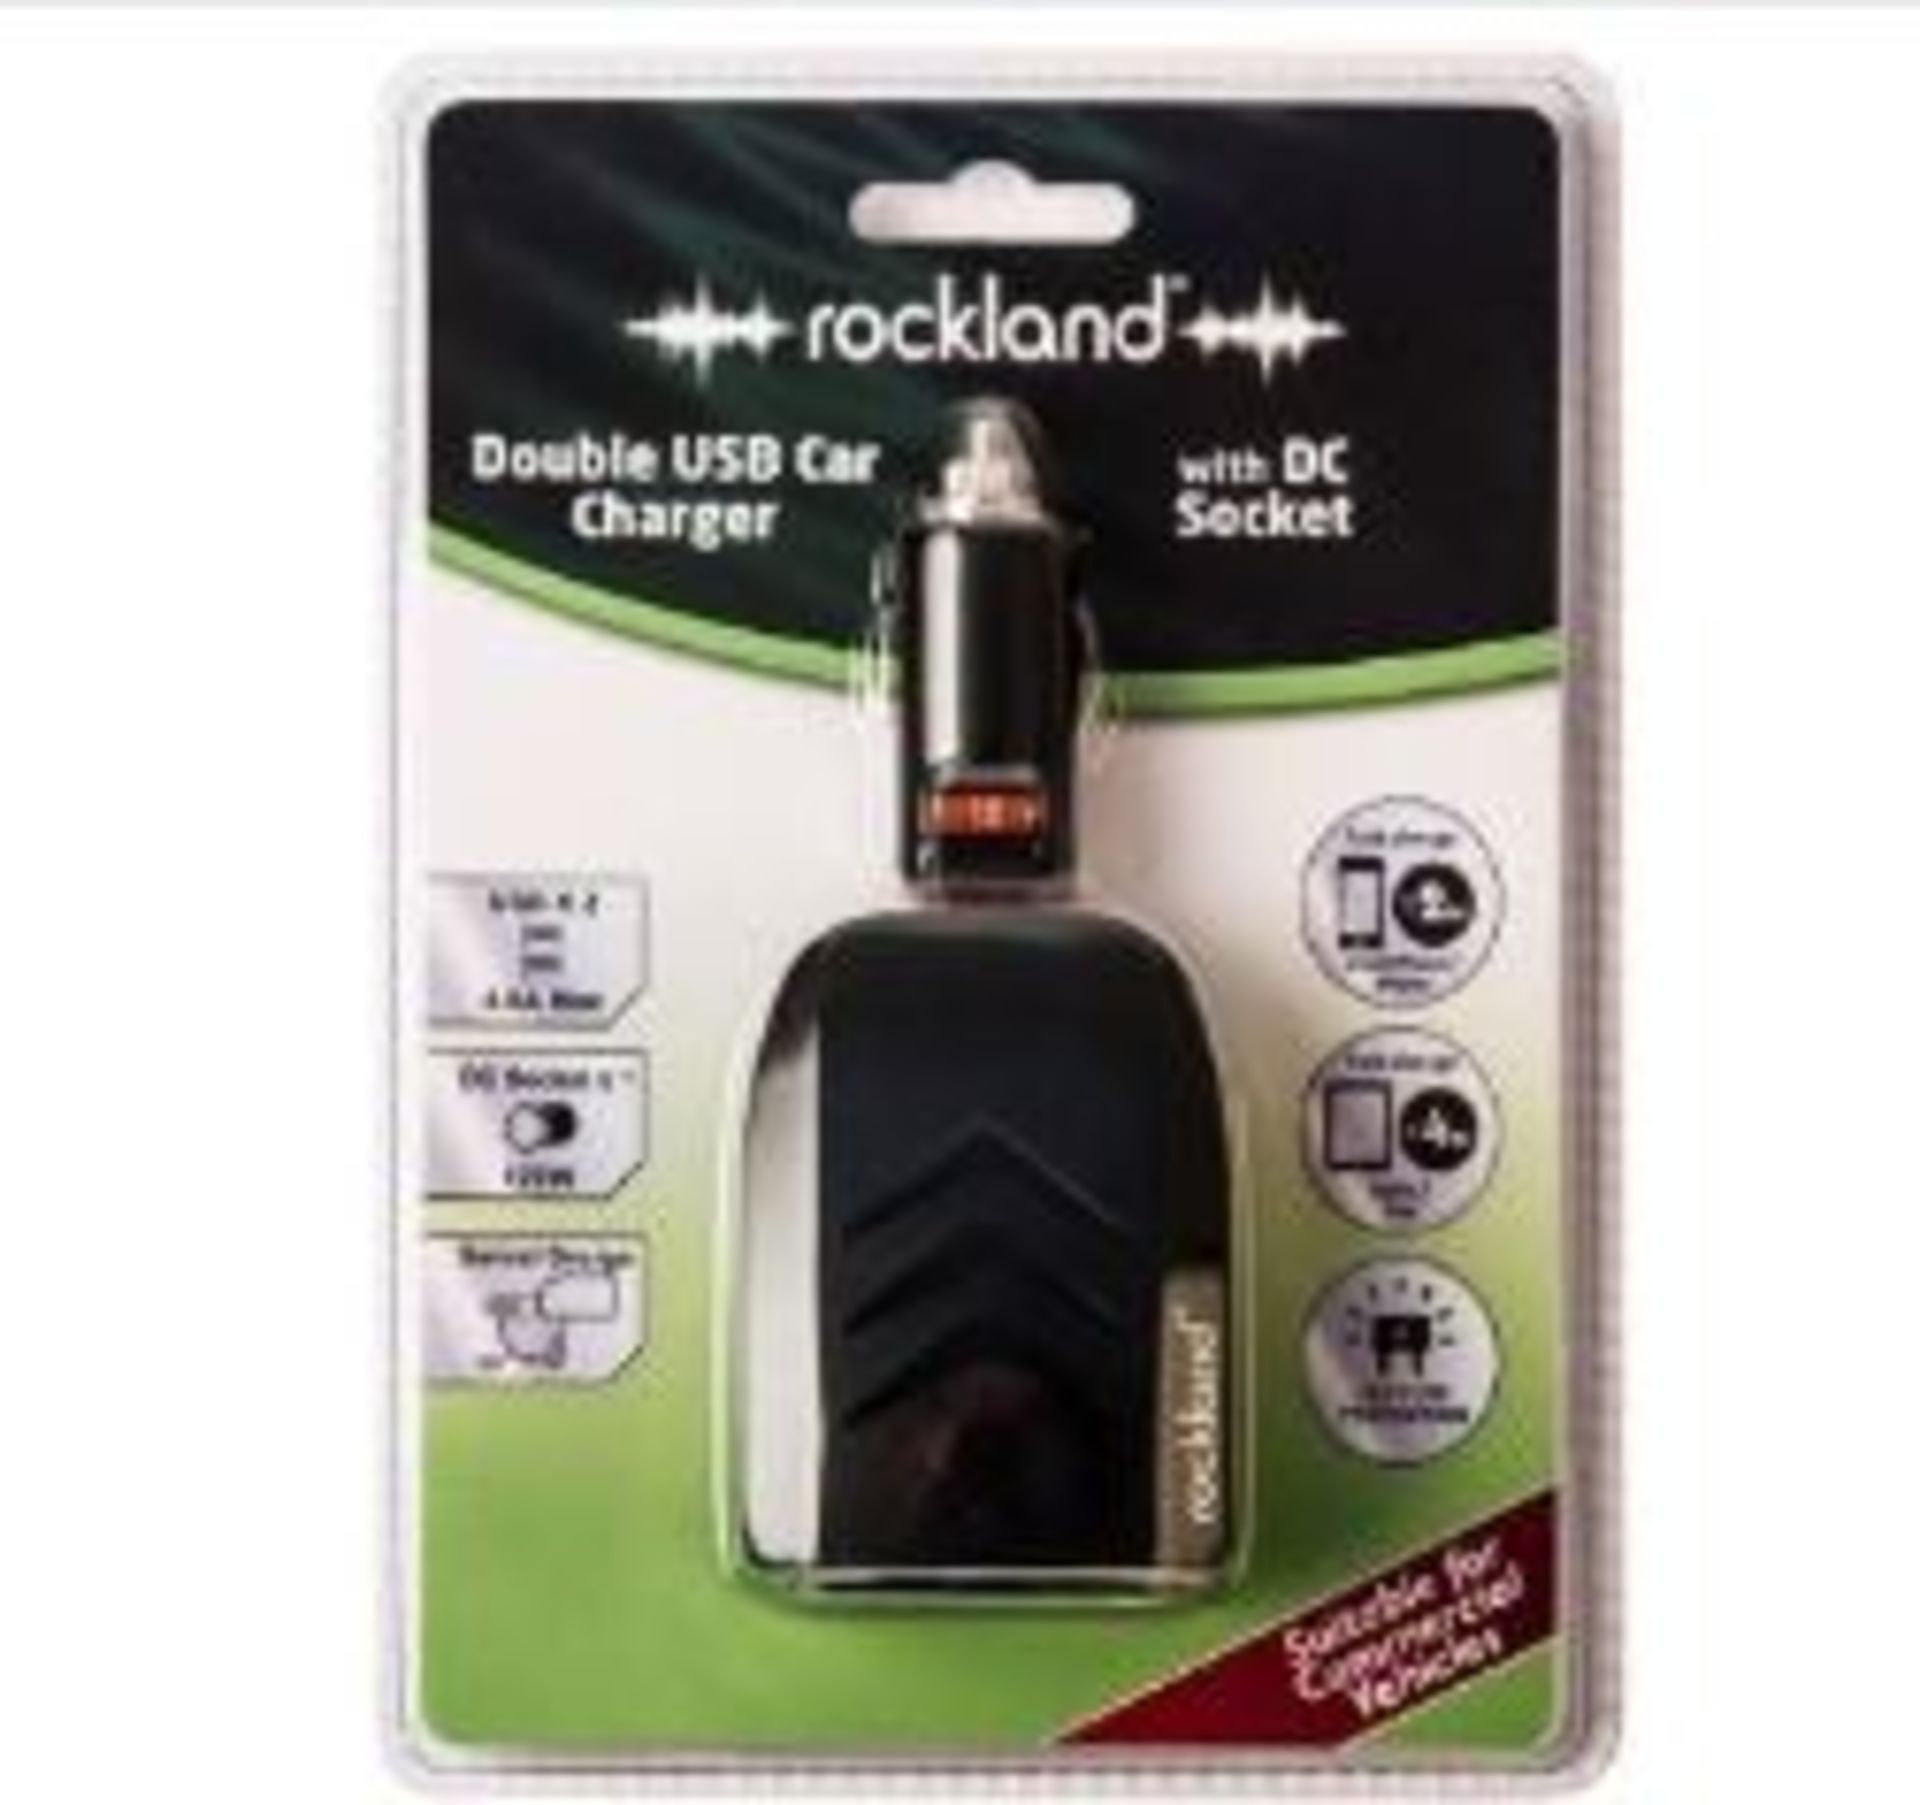 64 X BRAND NEW ROCKLAND DOUBLE USB CAR CHARGERS WITH DC SOCKET (ROW15TOP)